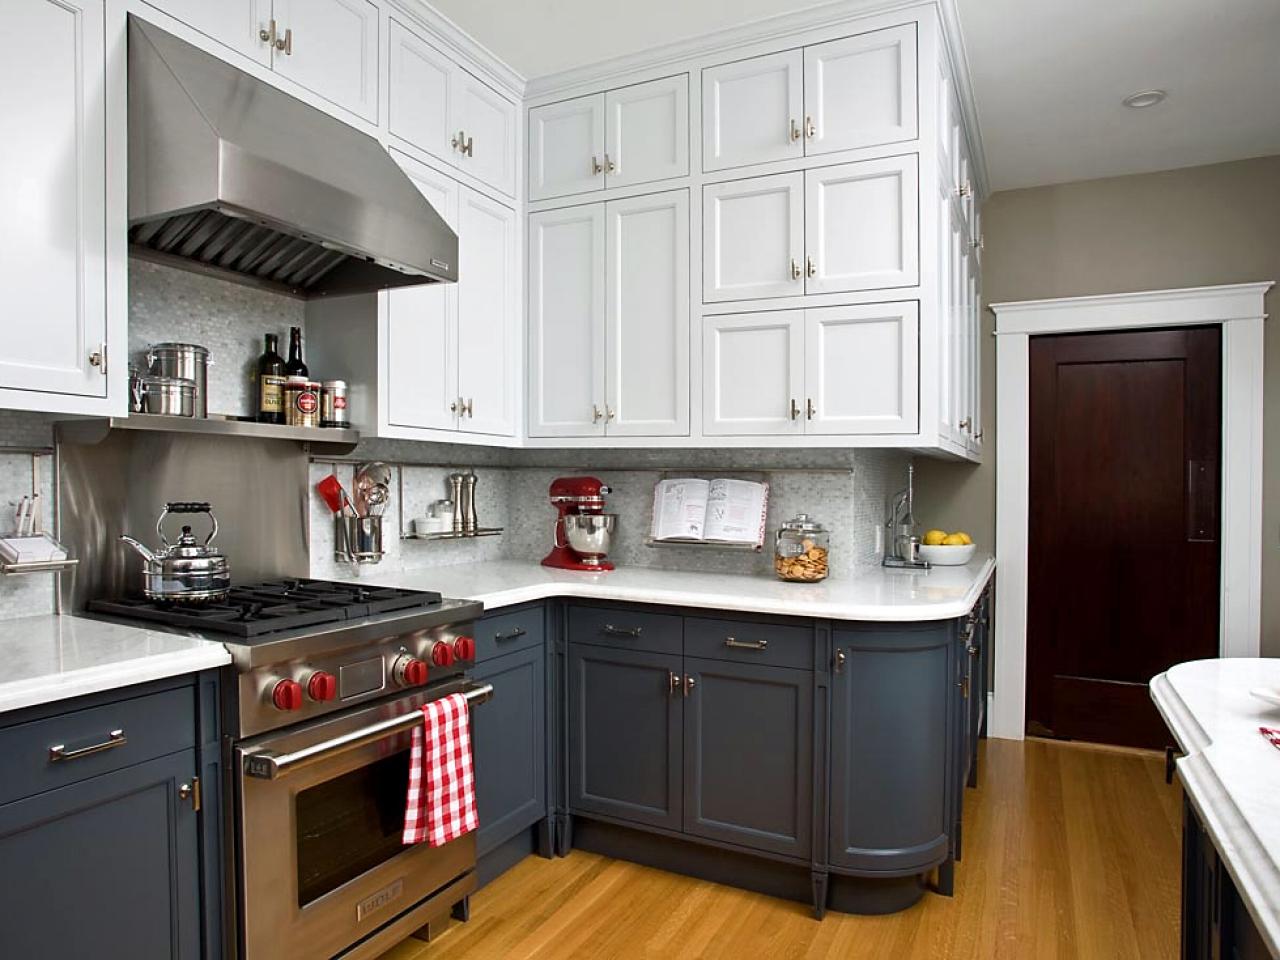 two-tone-kitchen-cabinets-black-and-white-rta-shaker-cabinets